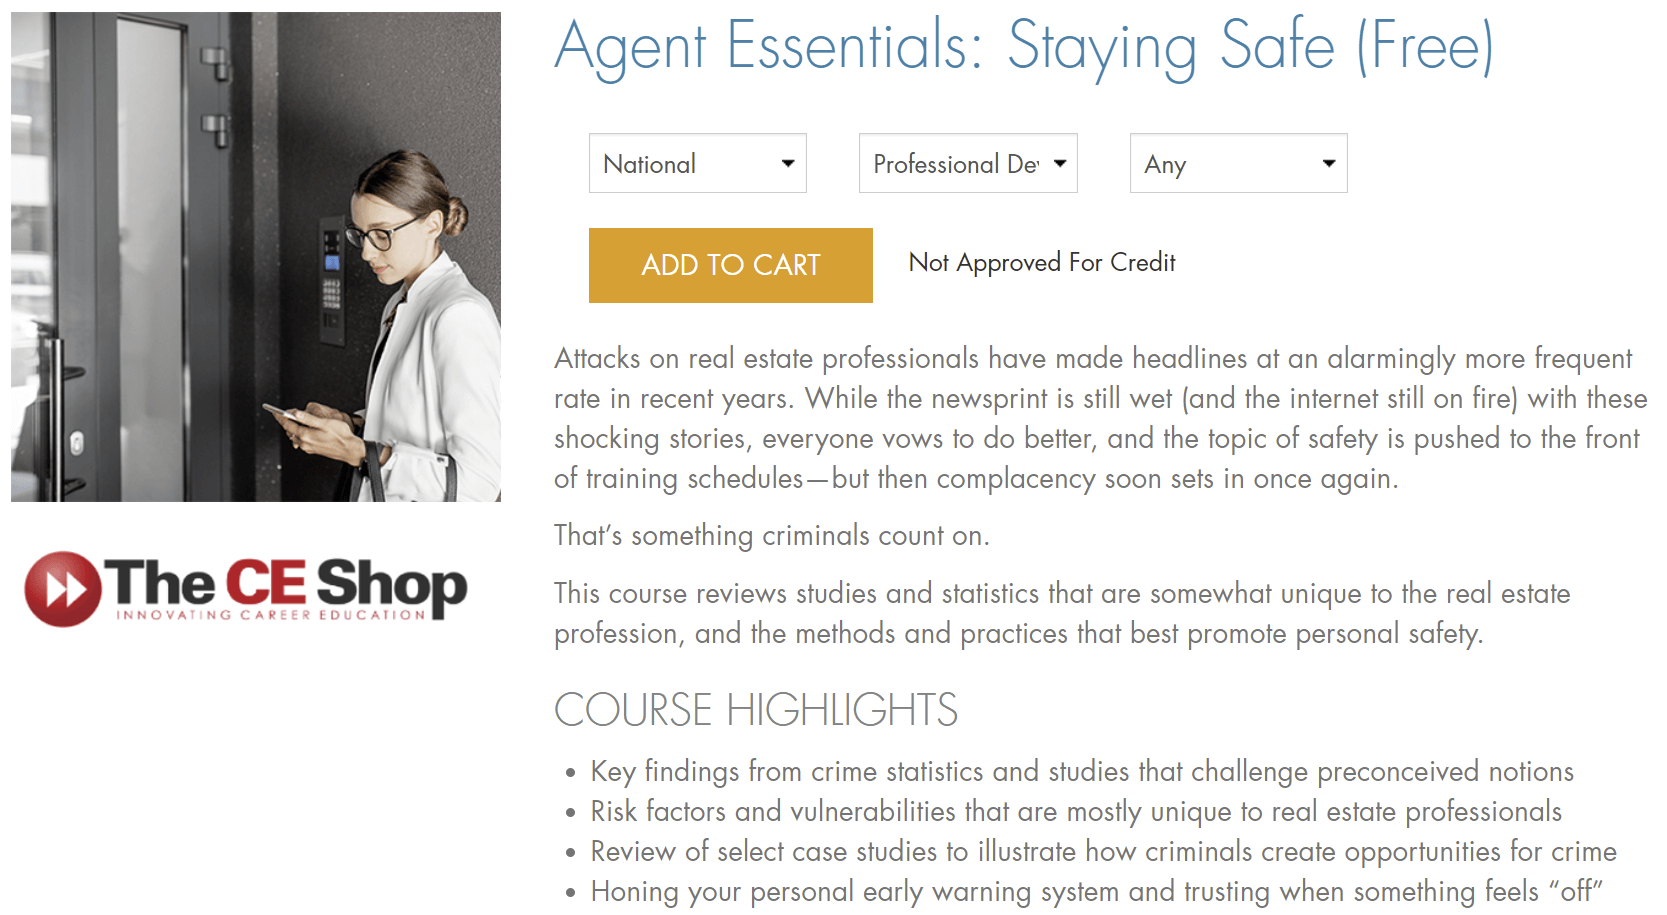 The CE Shop: Agent Essentials: Staying Safe and Staying in Your Business Overview